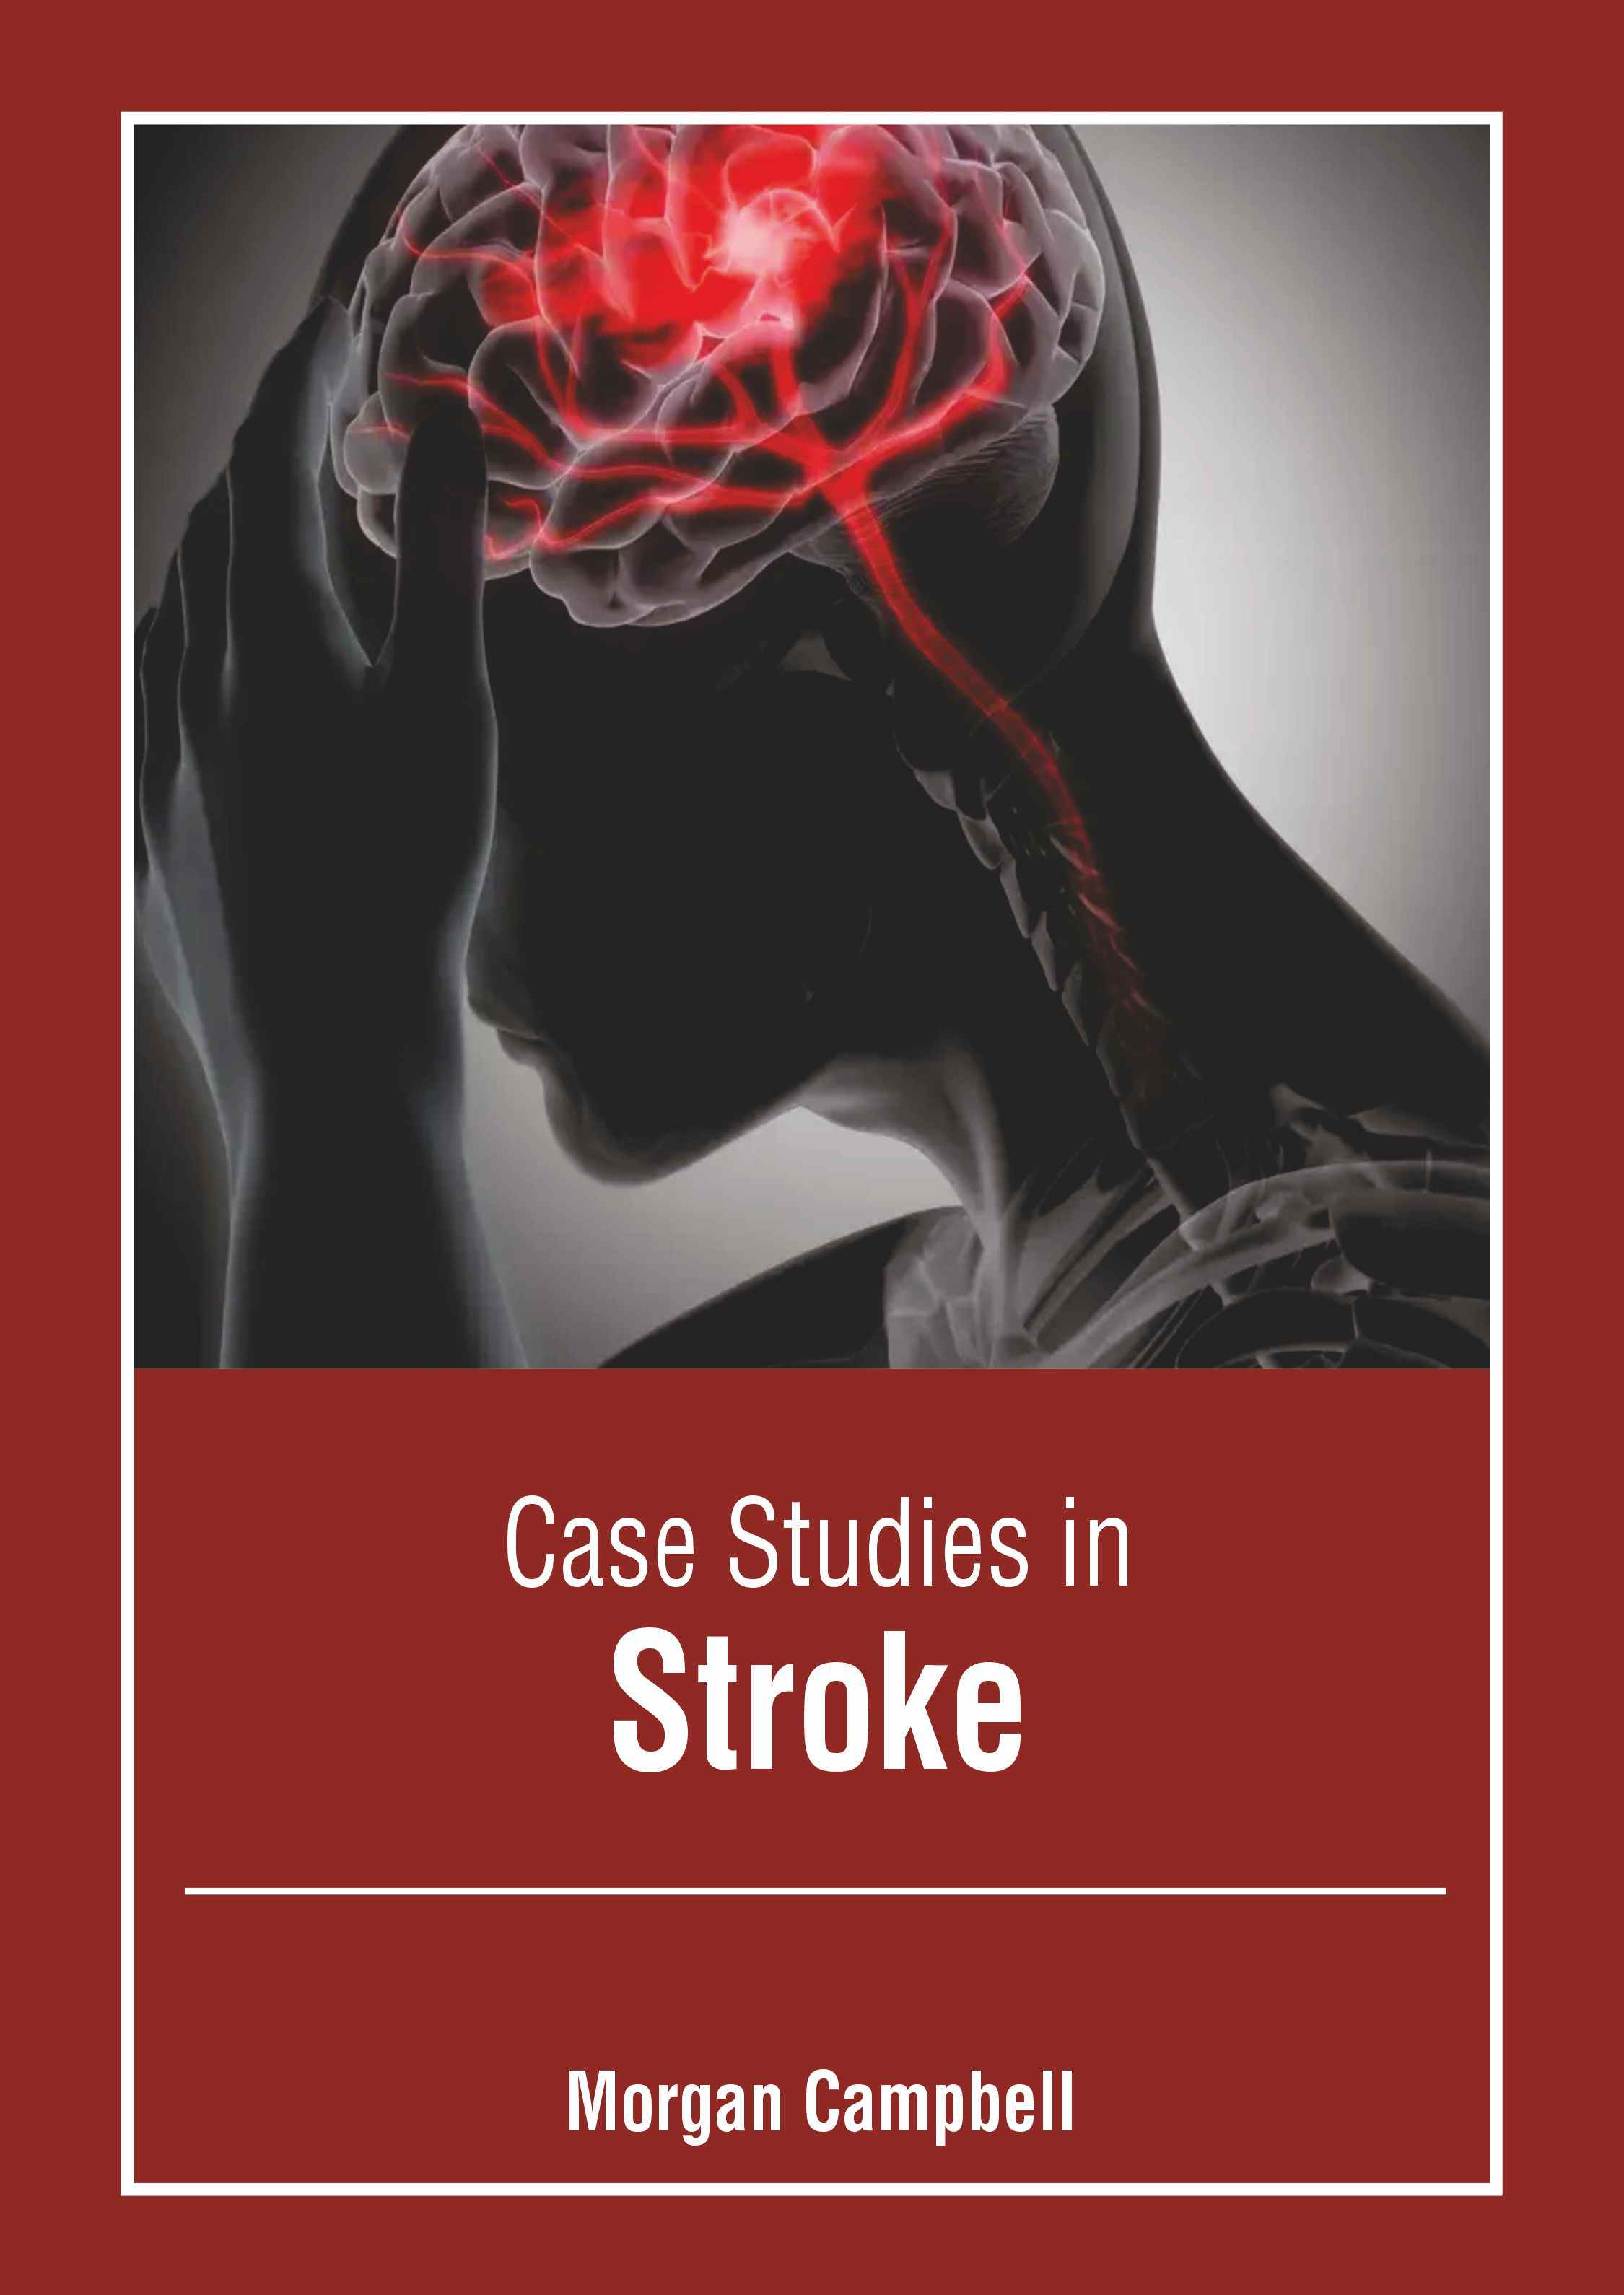 

exclusive-publishers/american-medical-publishers/case-studies-in-stroke-9798887406169